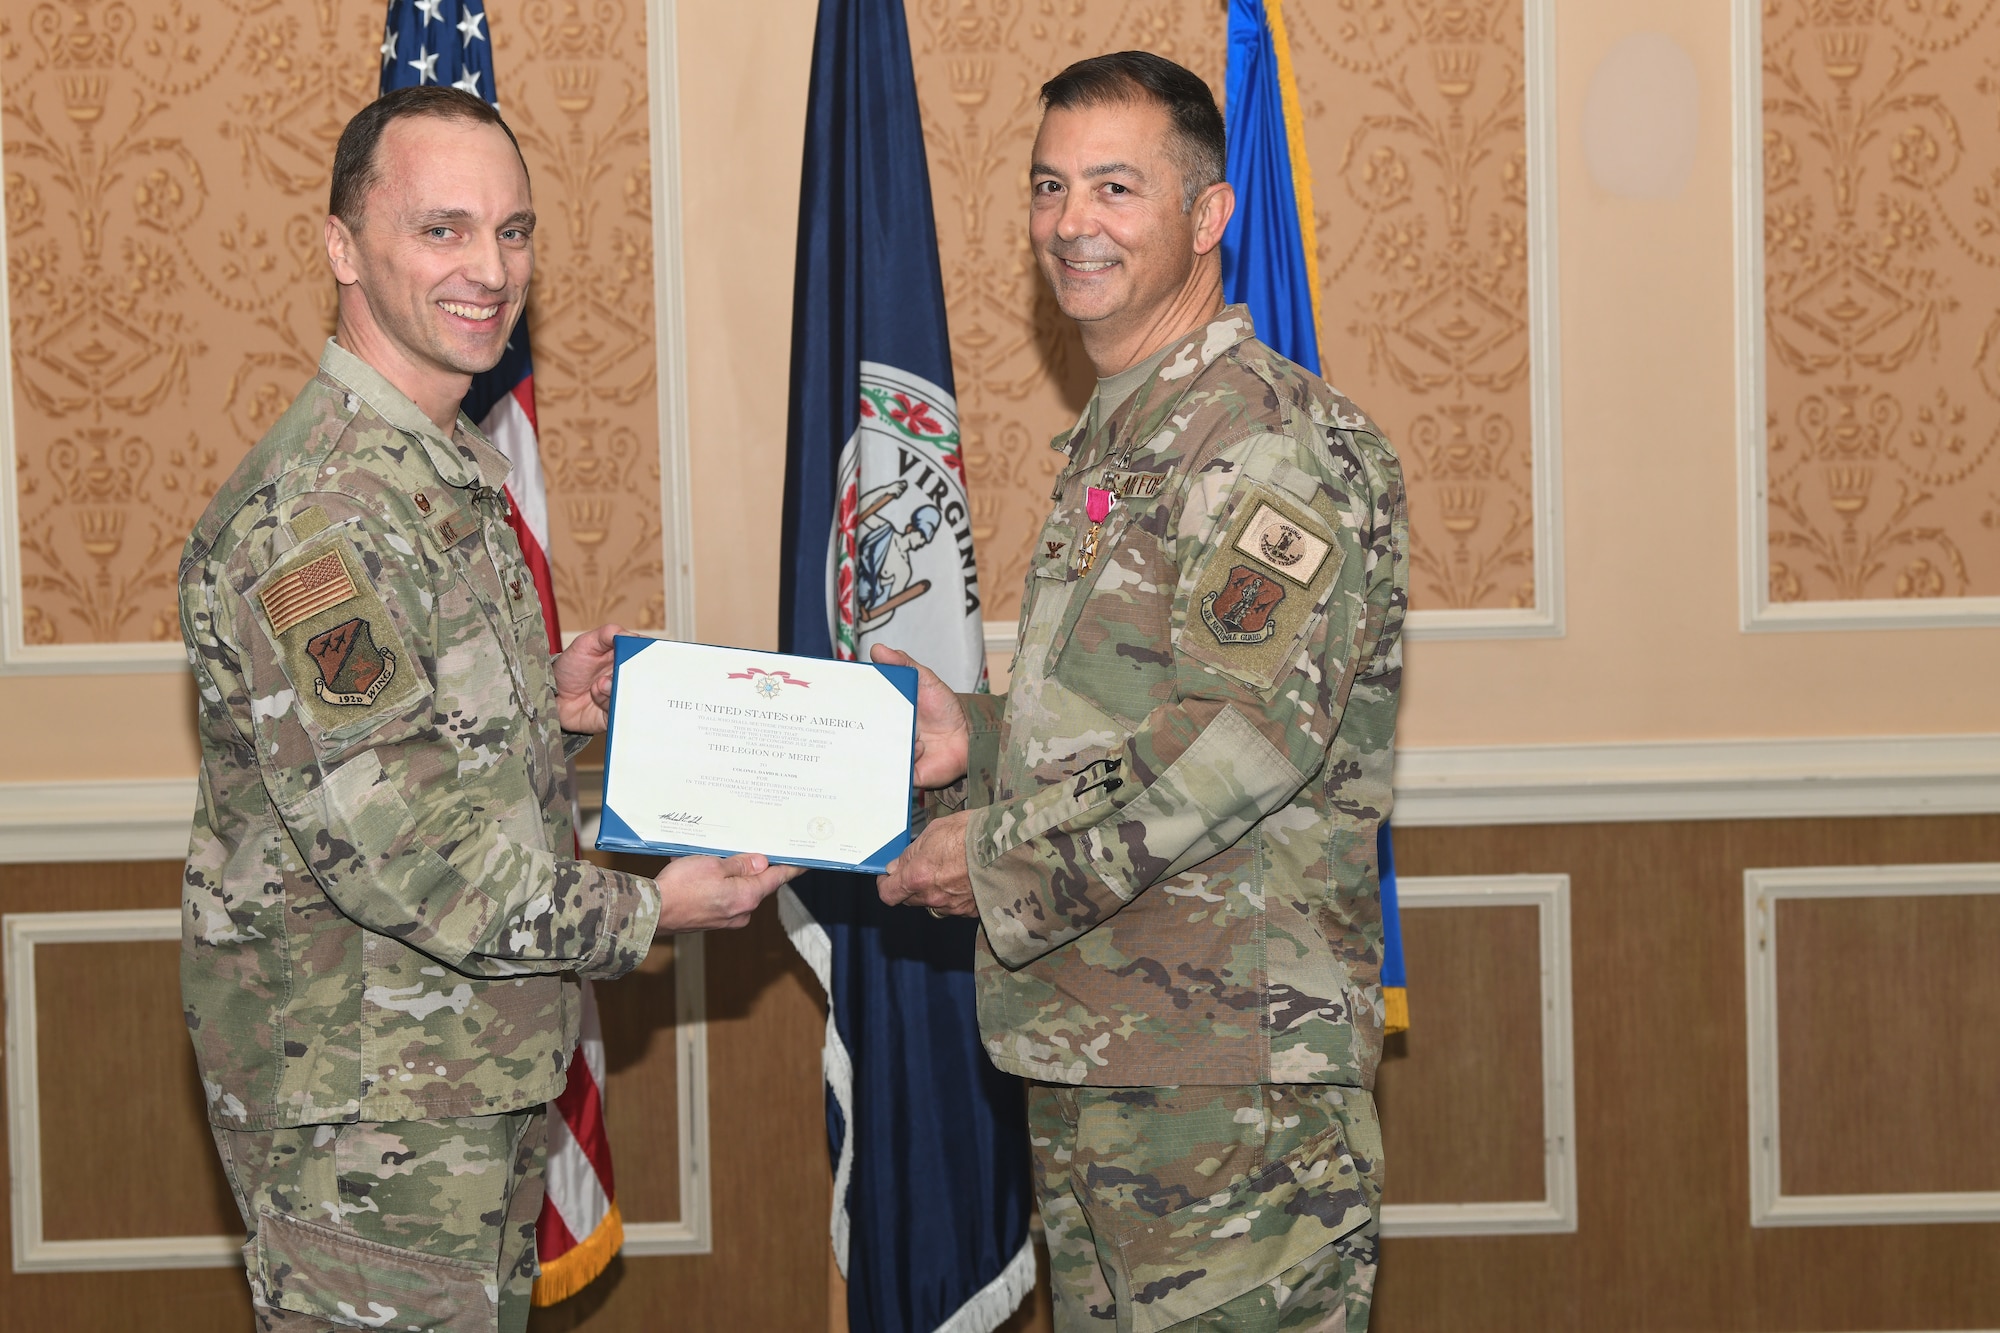 Two military members holding a certificate for the Legion of Merit, smiling for photo.